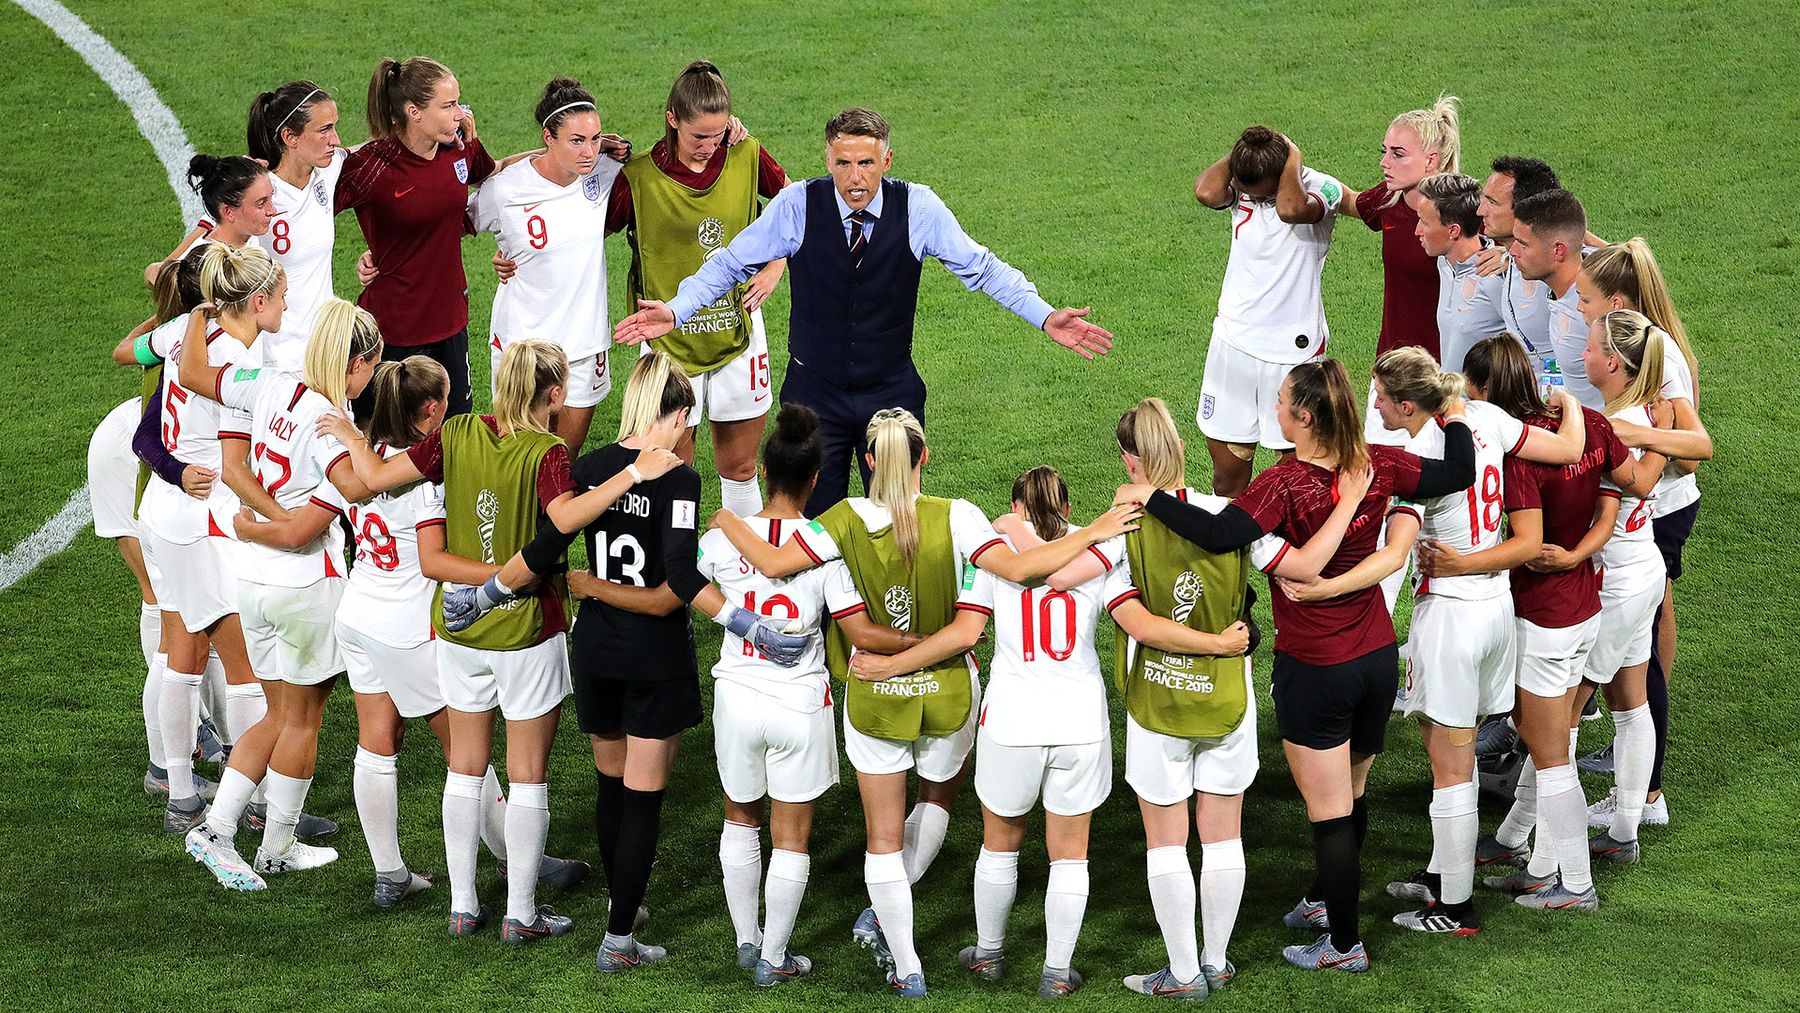 England Women's World Cup semifinal the most watched event on TV in